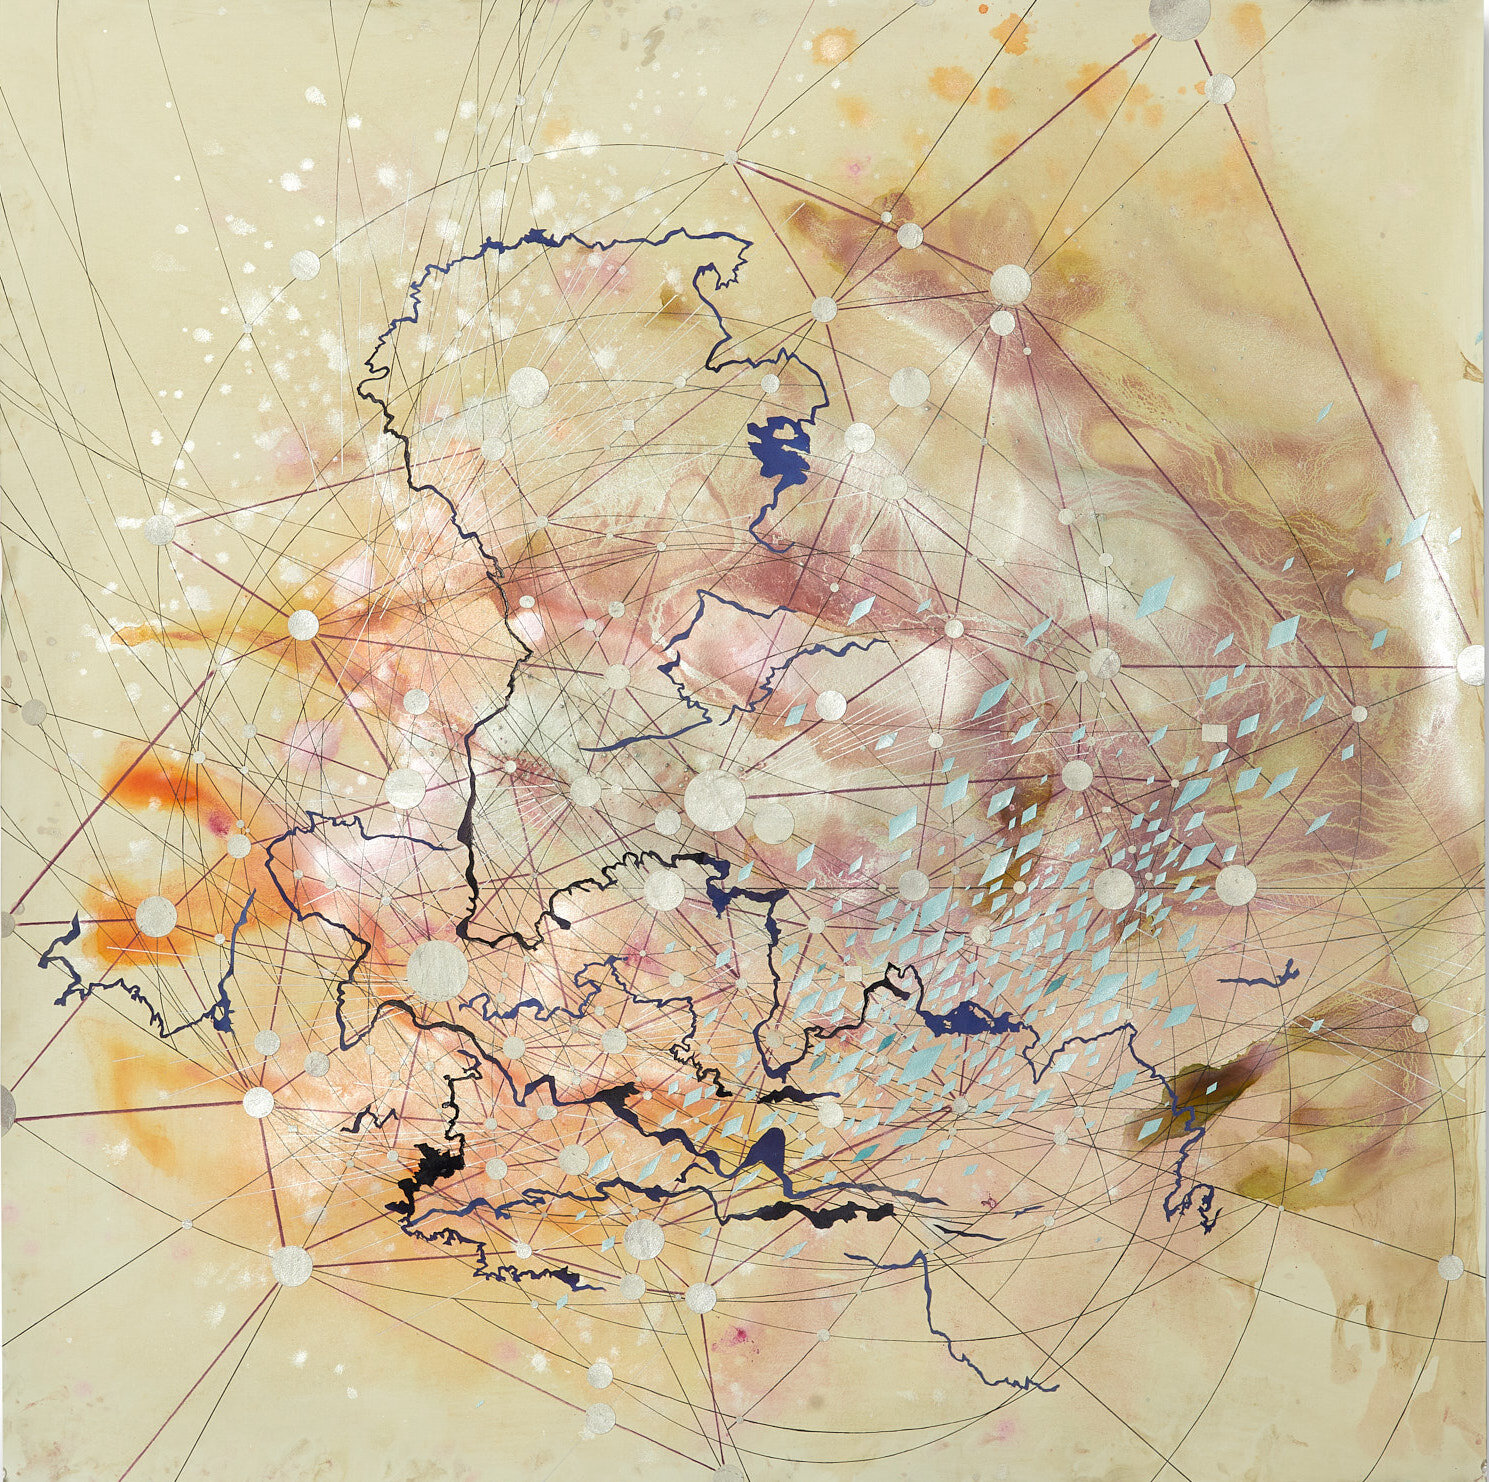  Val Britton,  Reverberation #73  , 2021, acrylic, ink, and collage on paper 36 x 36 inches (91.4 x 91.4 cm) 